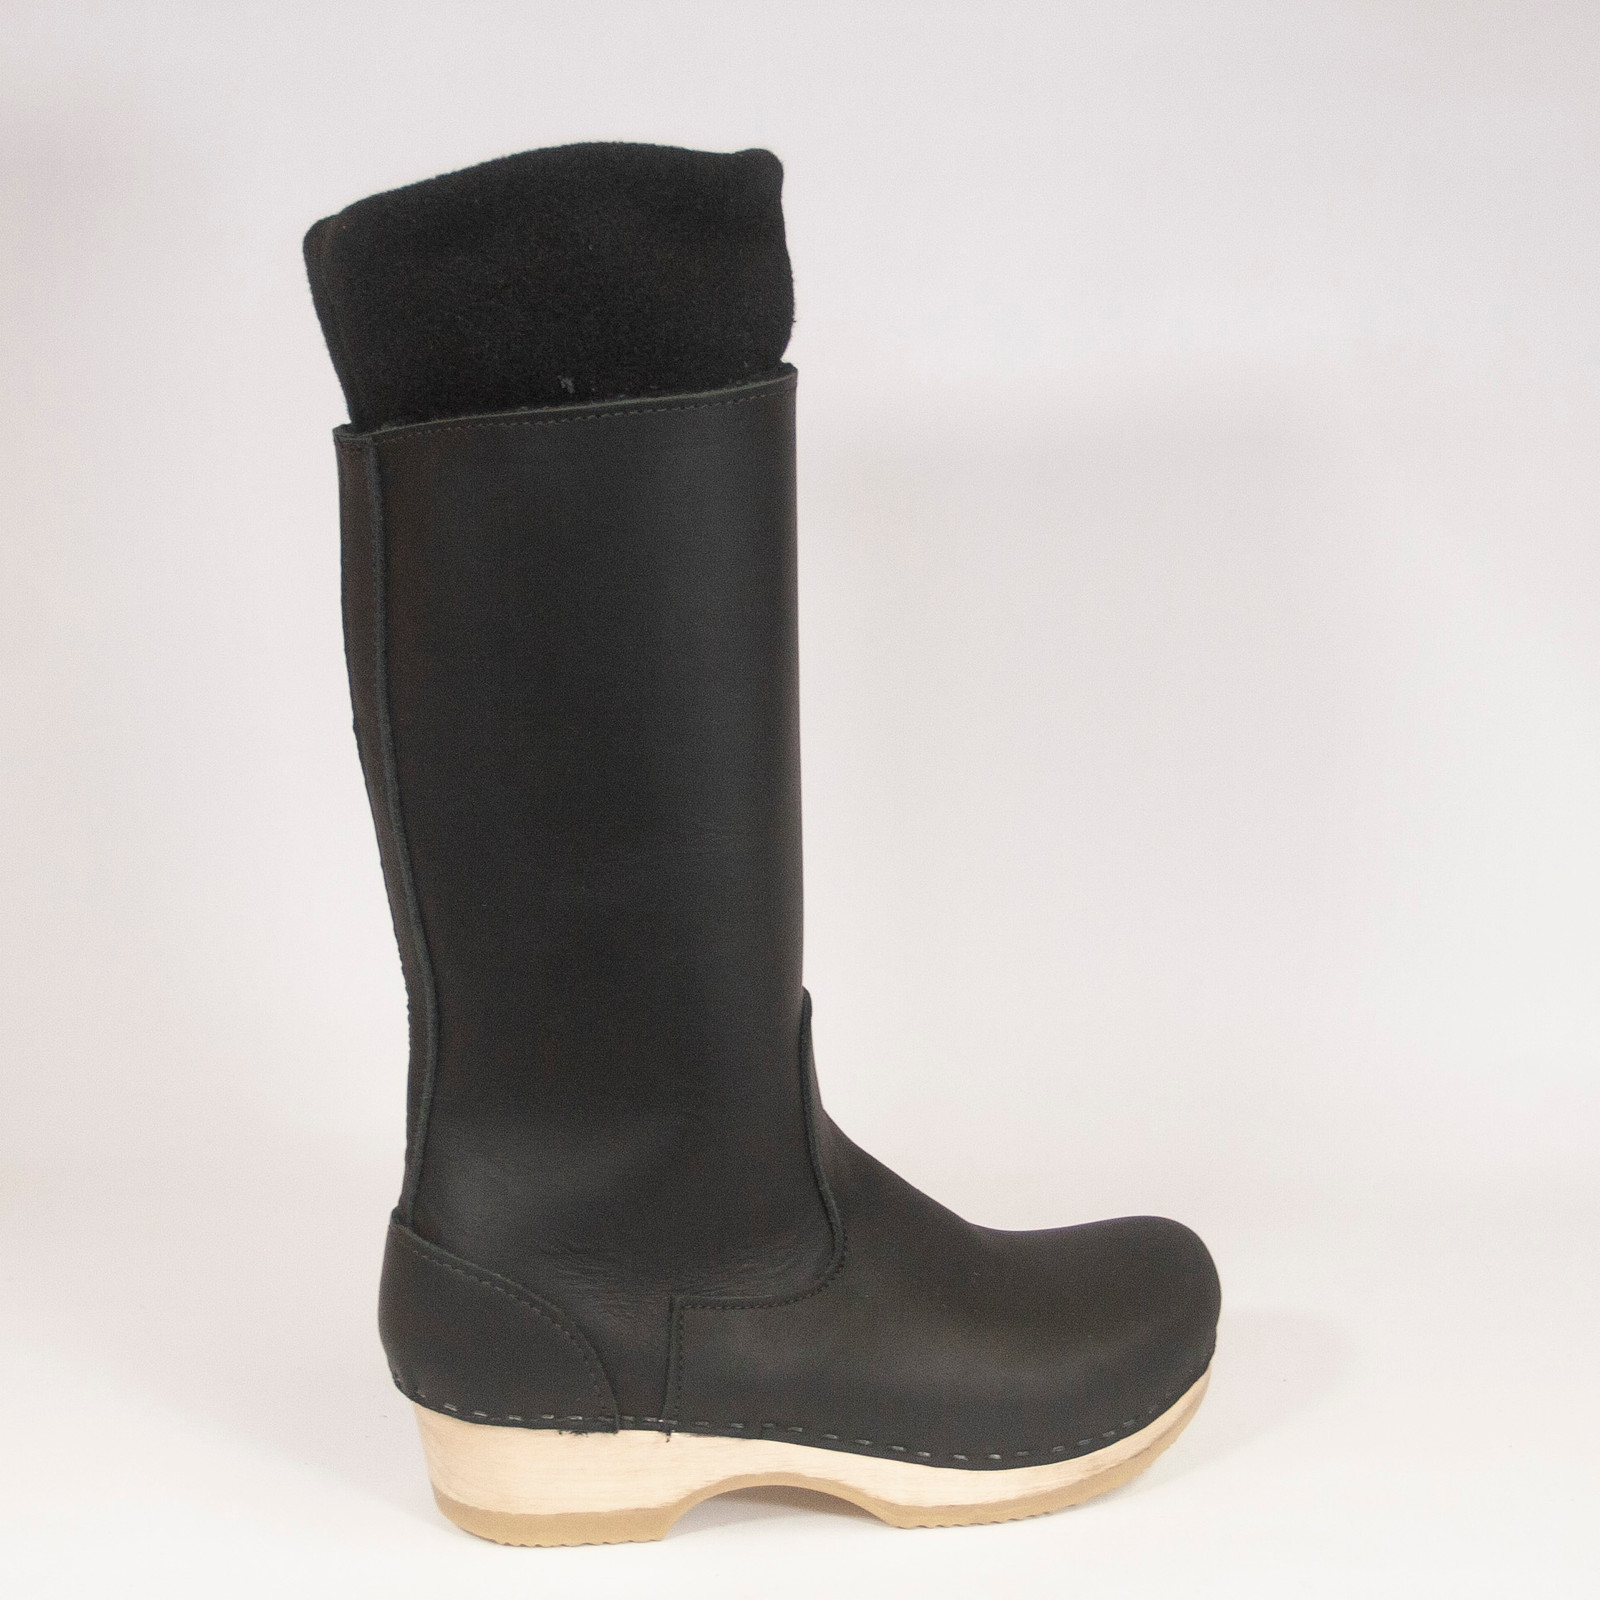 Fleece Cuff - 11"Clog Booties - Black - All Leather